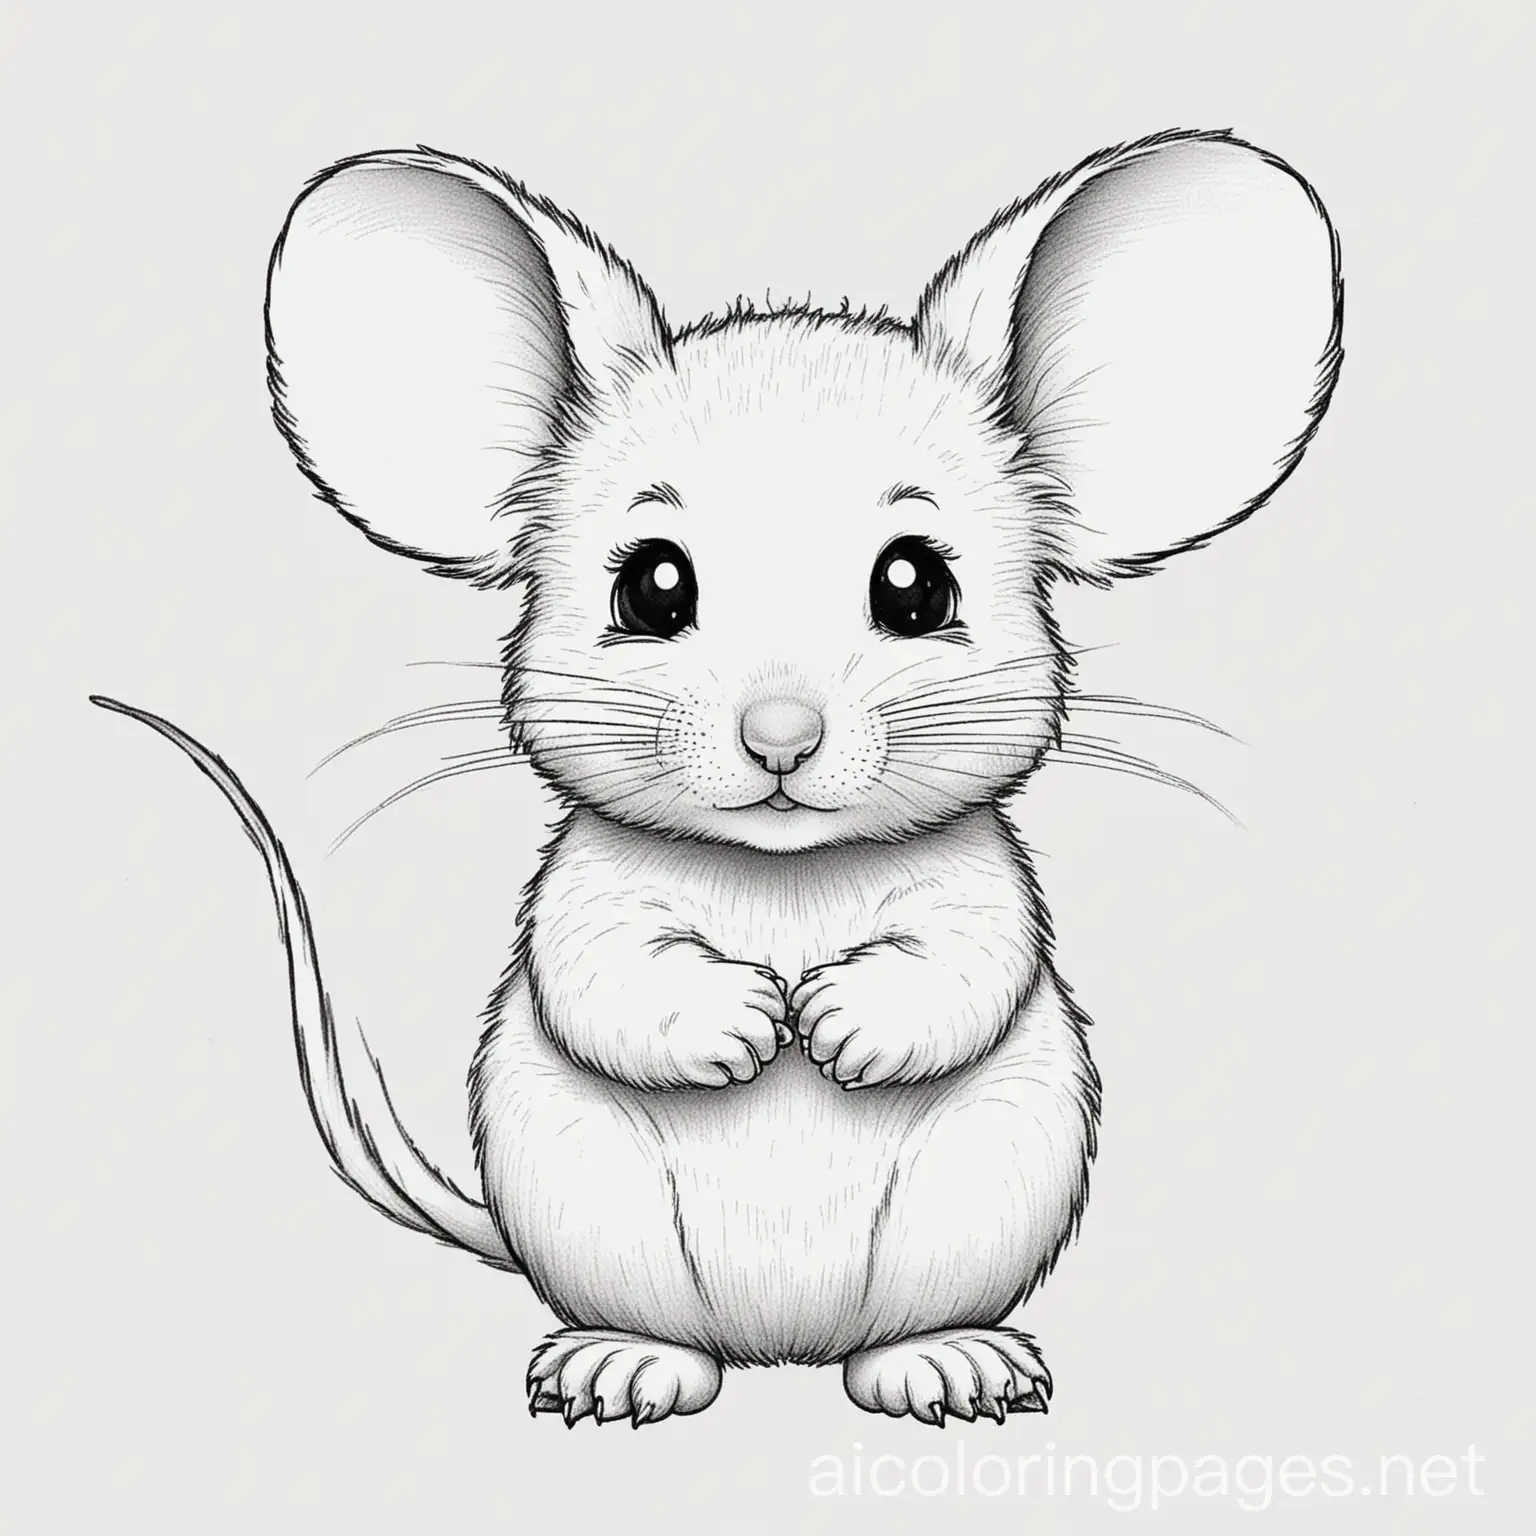 mouse, Coloring Page, black and white, line art, white background, Simplicity, Ample White Space. The background of the coloring page is plain white to make it easy for young children to color within the lines. The outlines of all the subjects are easy to distinguish, making it simple for kids to color without too much difficulty